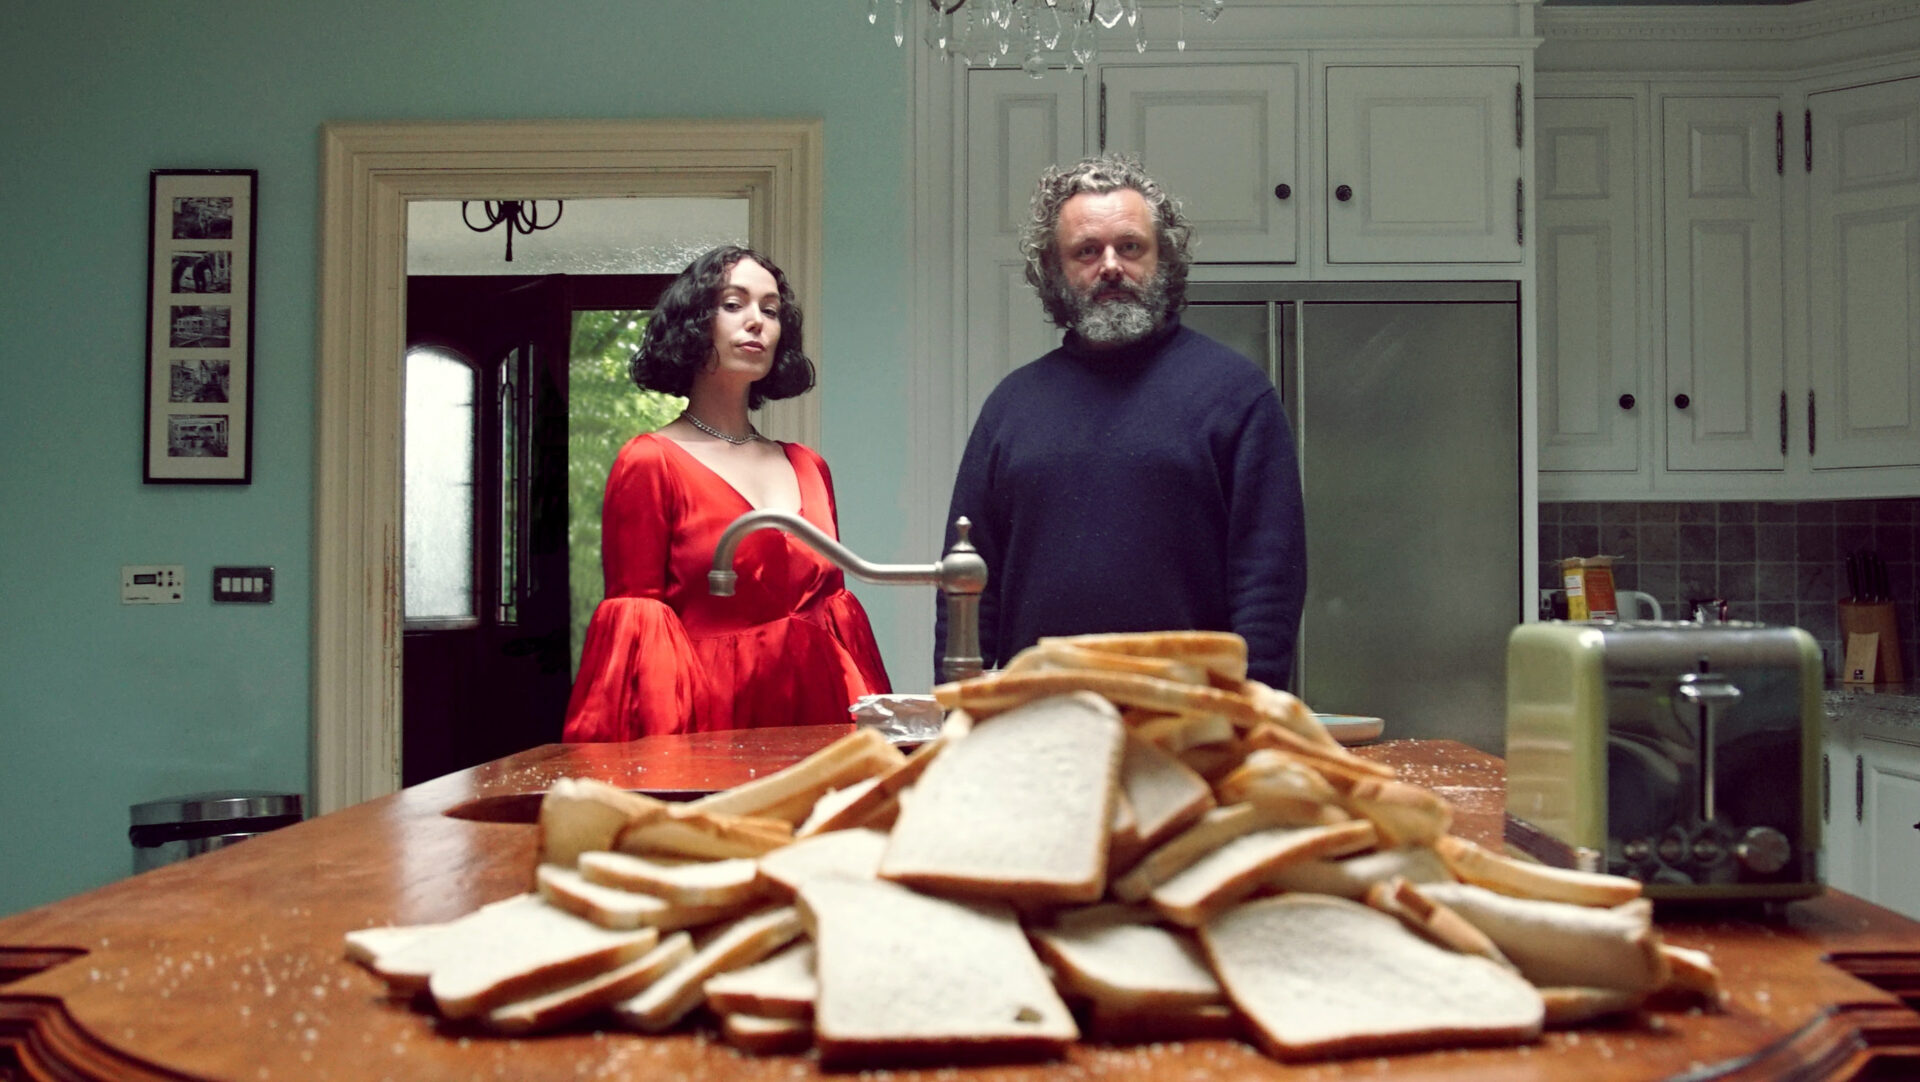 NEWS: Kelly Lee Owens unveils new video for 'Corner of My Sky' featuring Michael Sheen